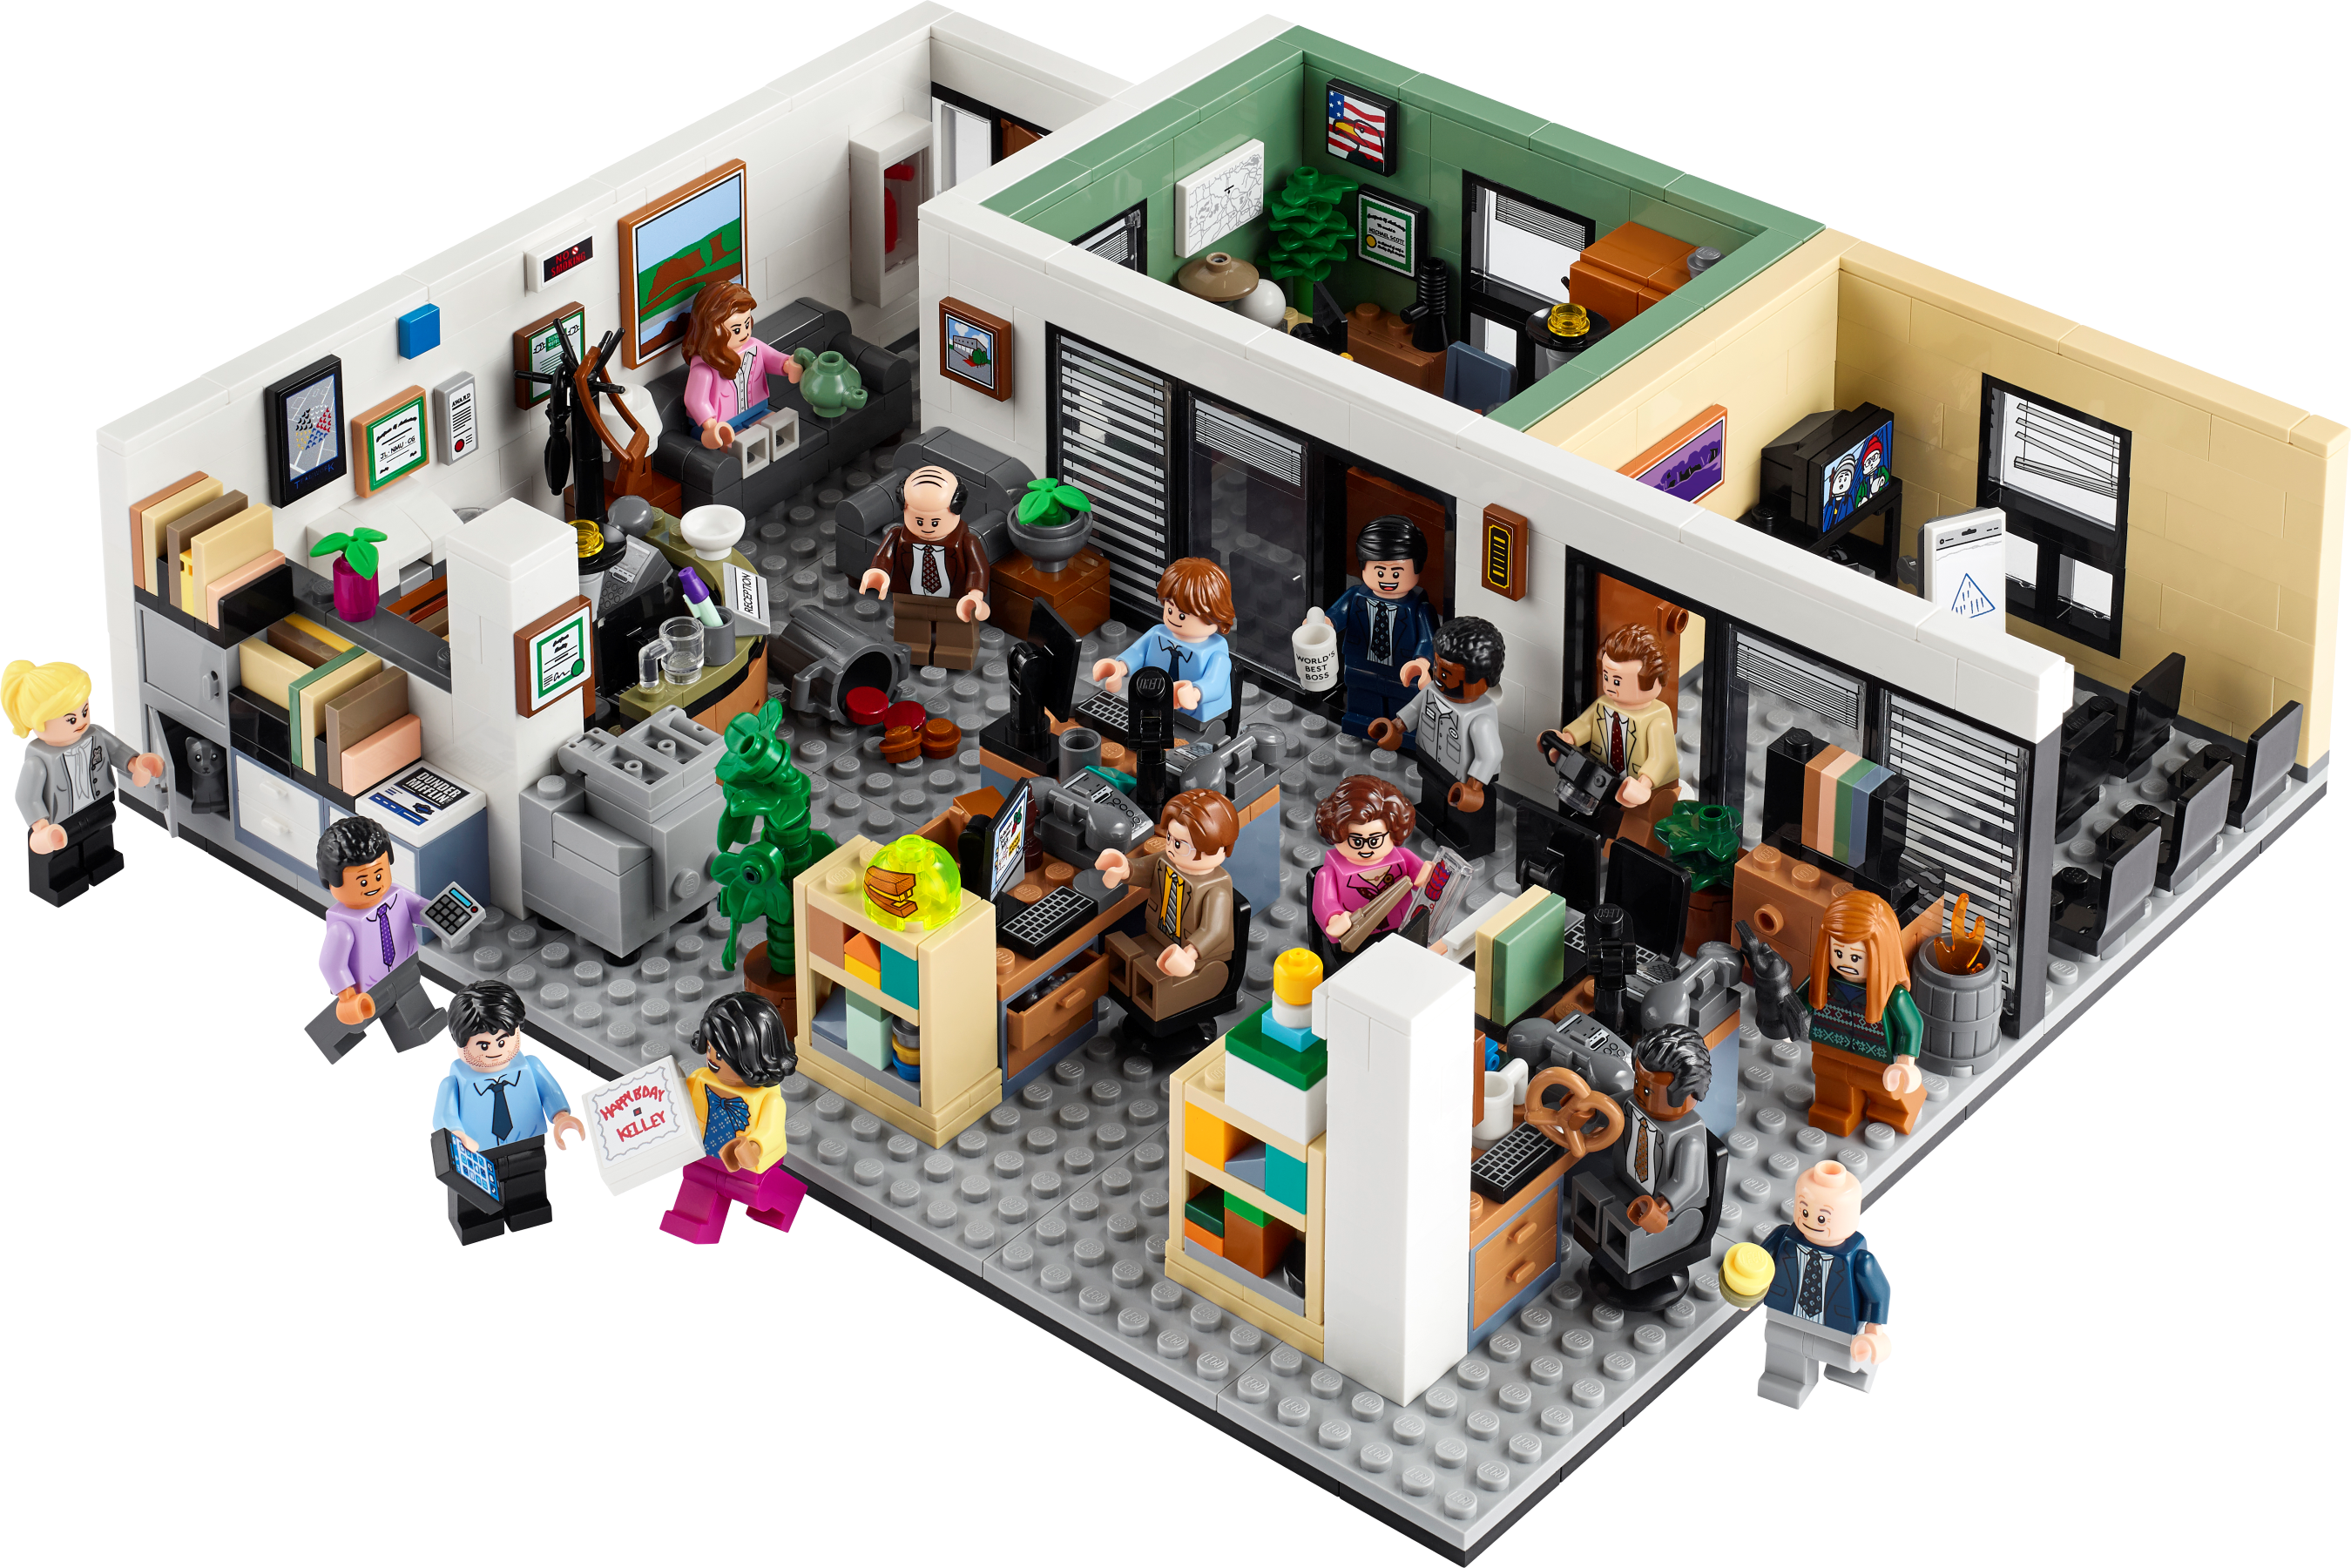 The Office 21336 | Ideas | Buy online at the Official LEGO® Shop US